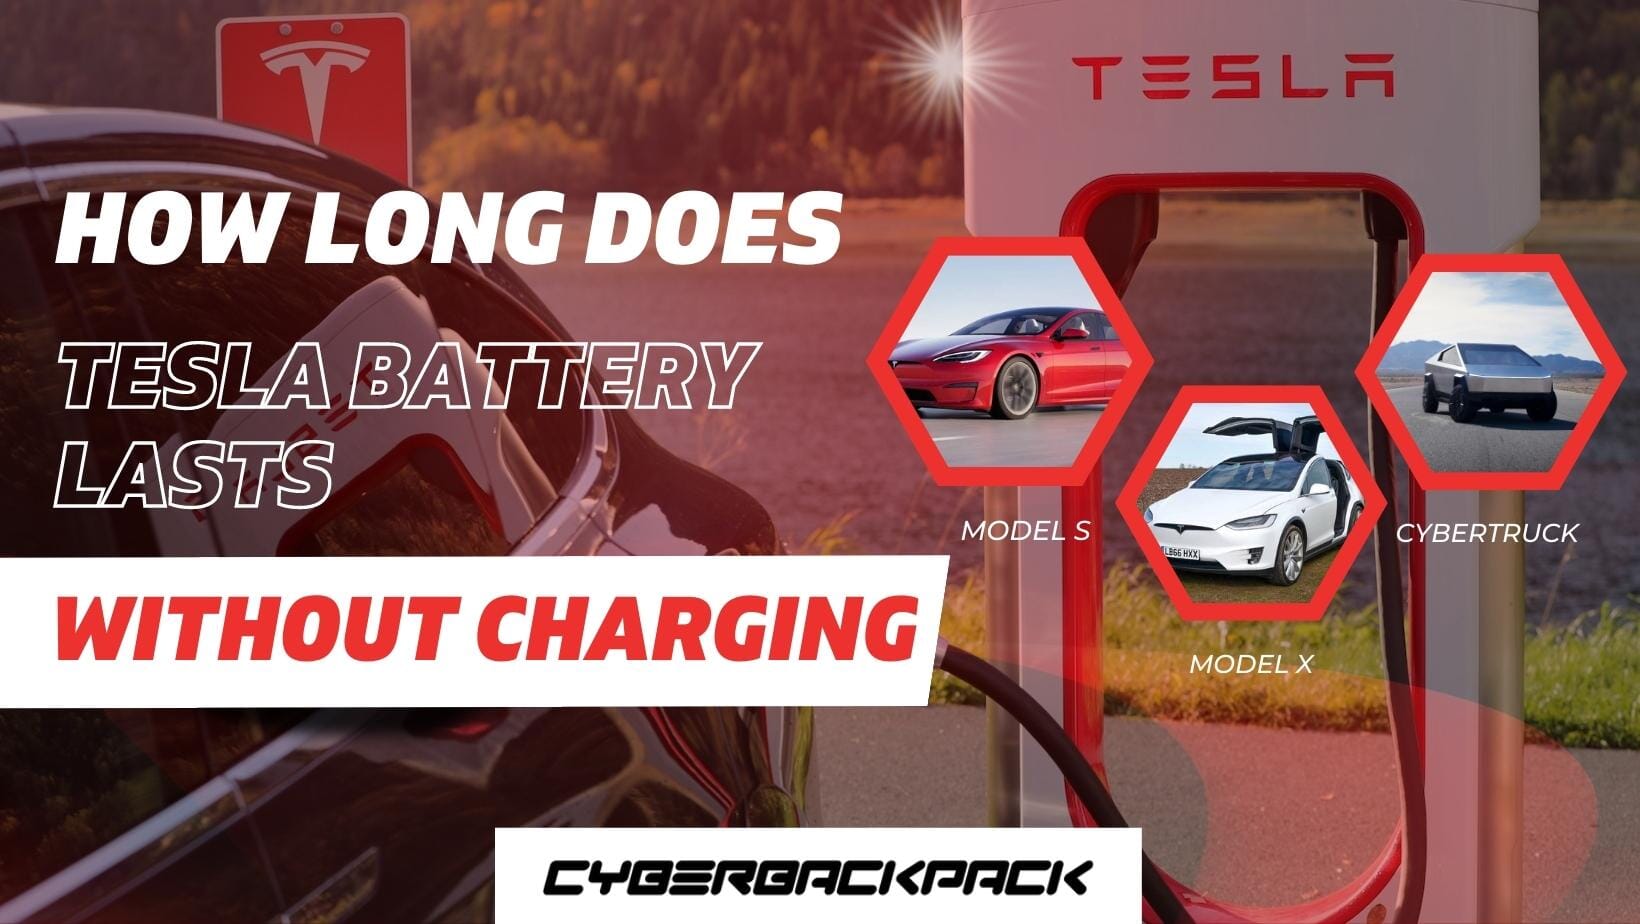 Anker's new battery can charge your phone, Tesla Model S, or